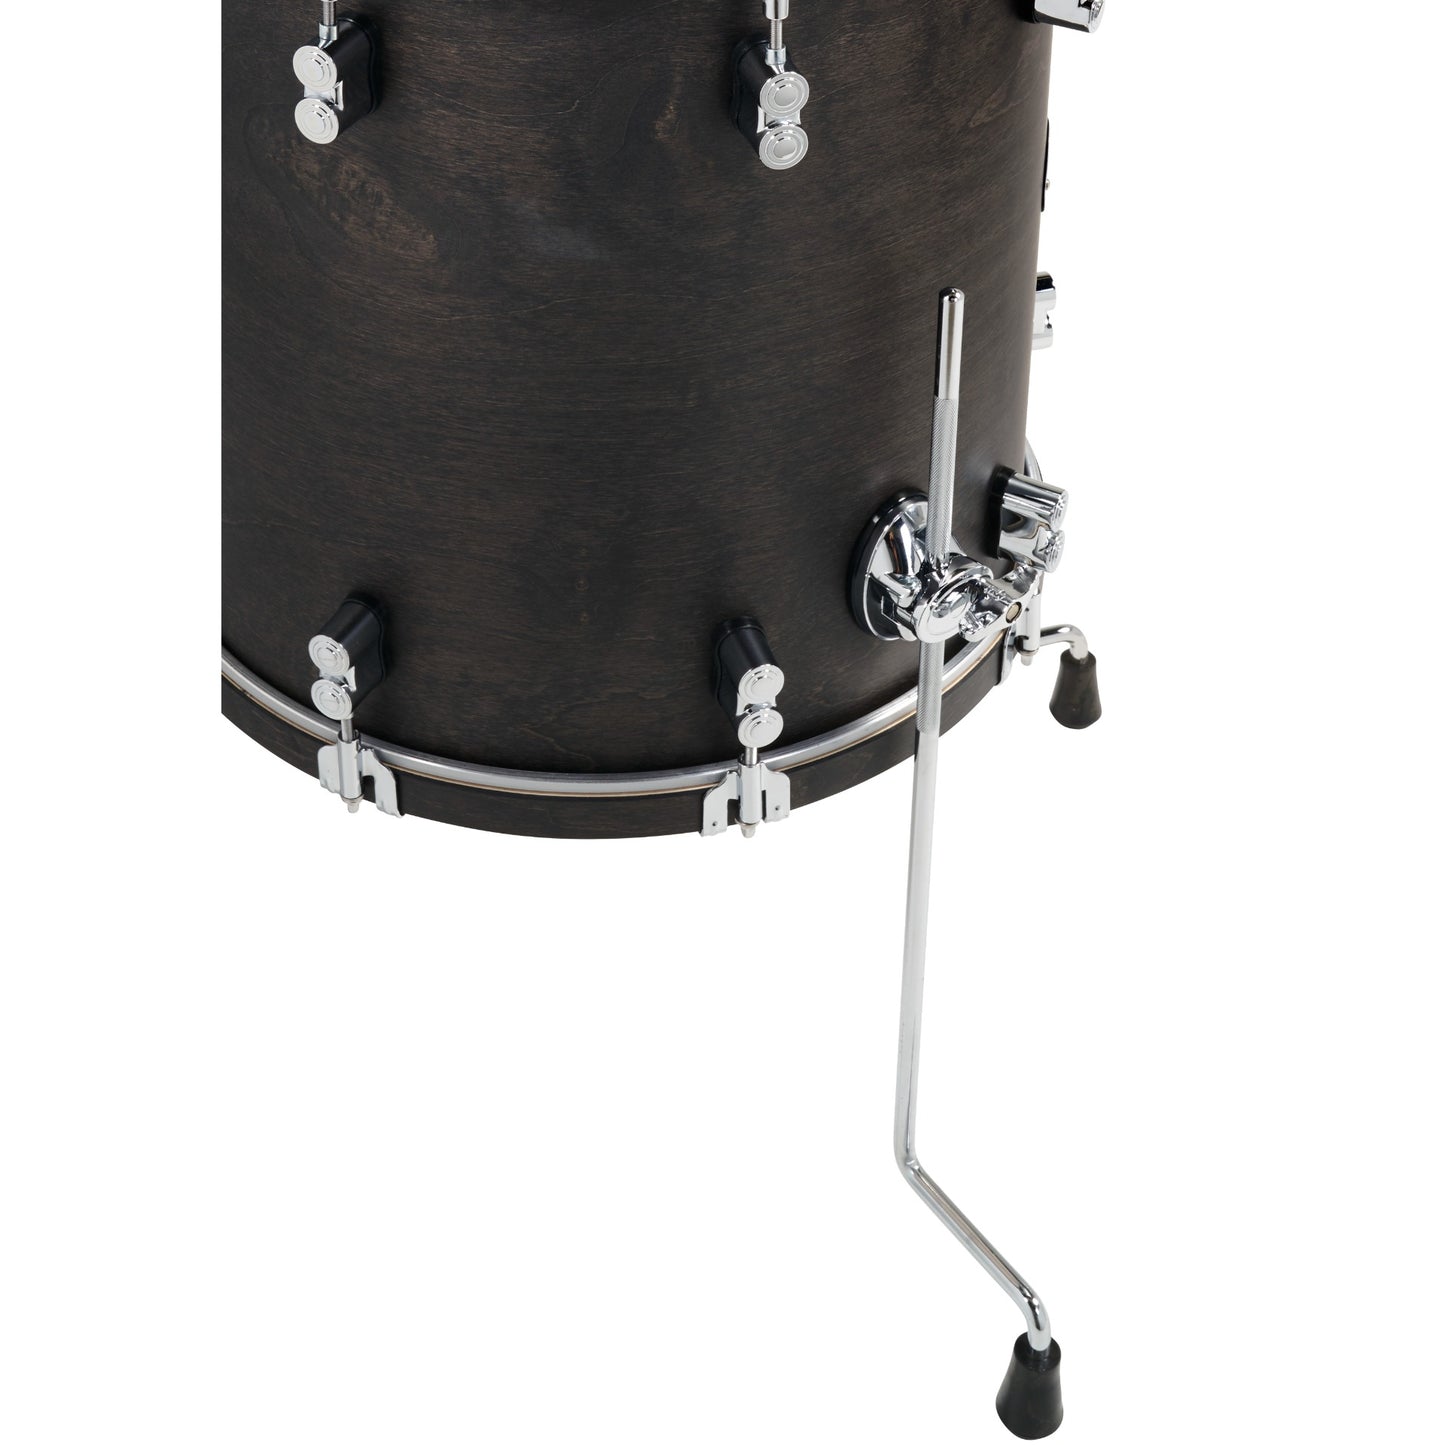 Pacific Drums & Percussion Concept Classic 3-Piece Pack - Ebony